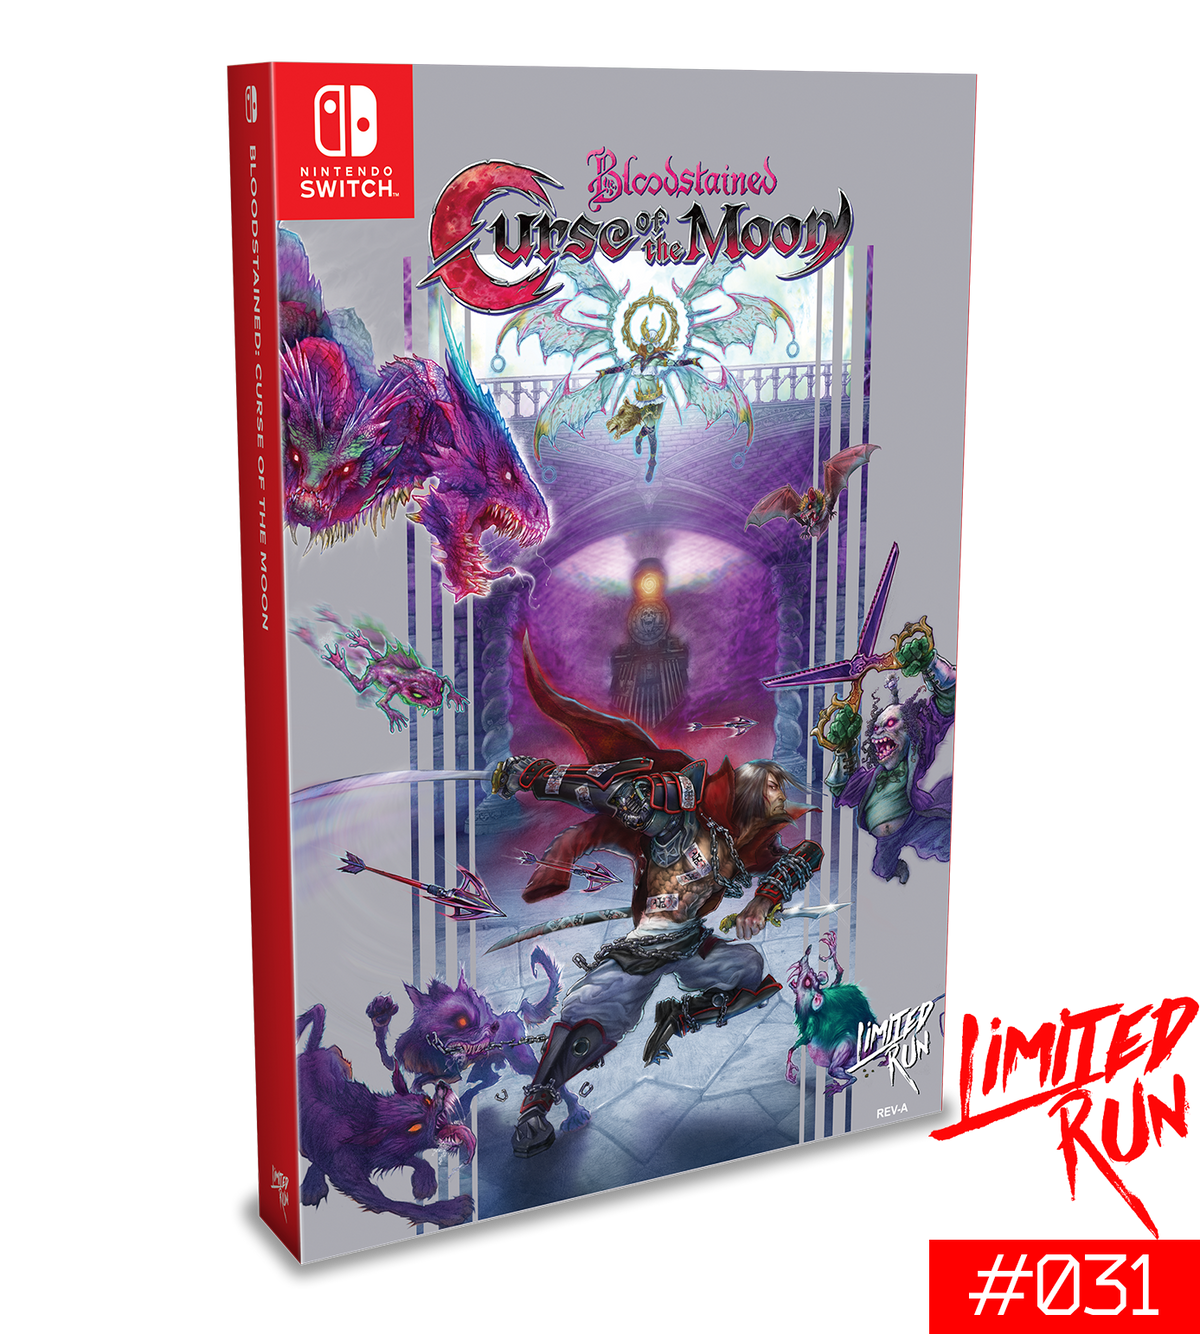 Bloodstained: Curse of the Moon Classic Edition (Limited Run #031) - (NSW) Nintendo Switch Video Games Limited Run Games   